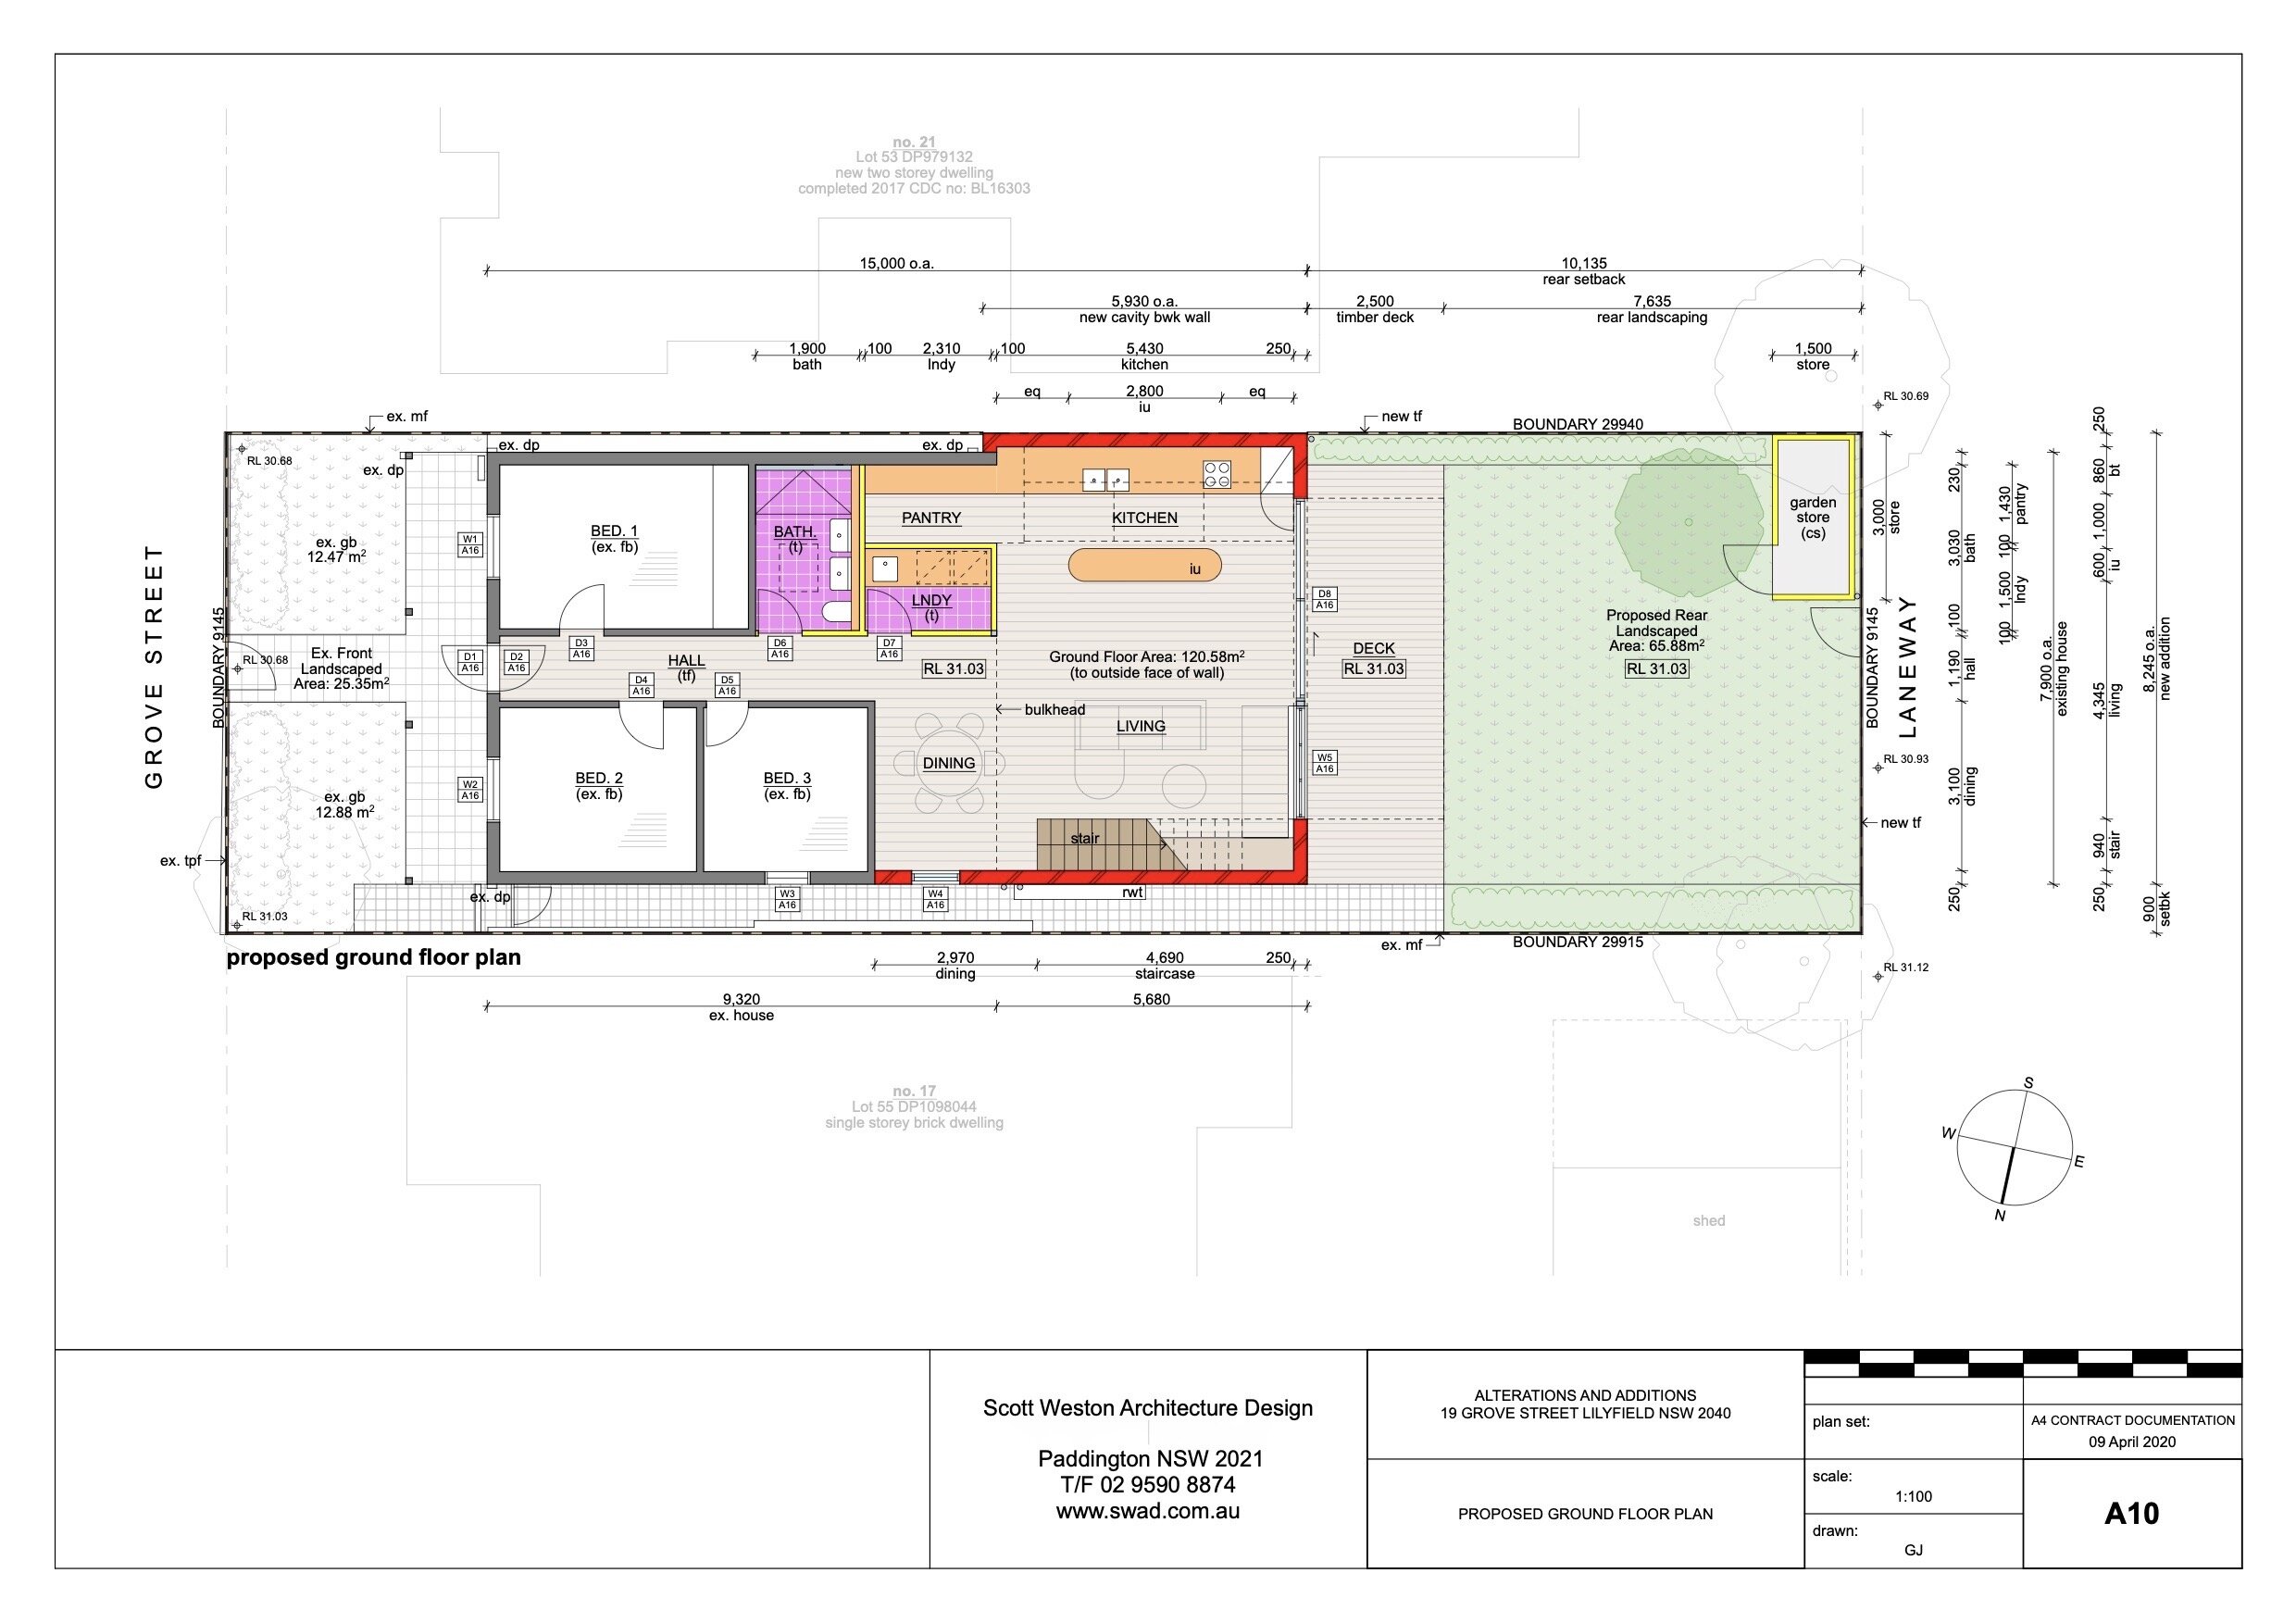 A10 PROPOSED GROUND FLOOR PLAN.jpeg